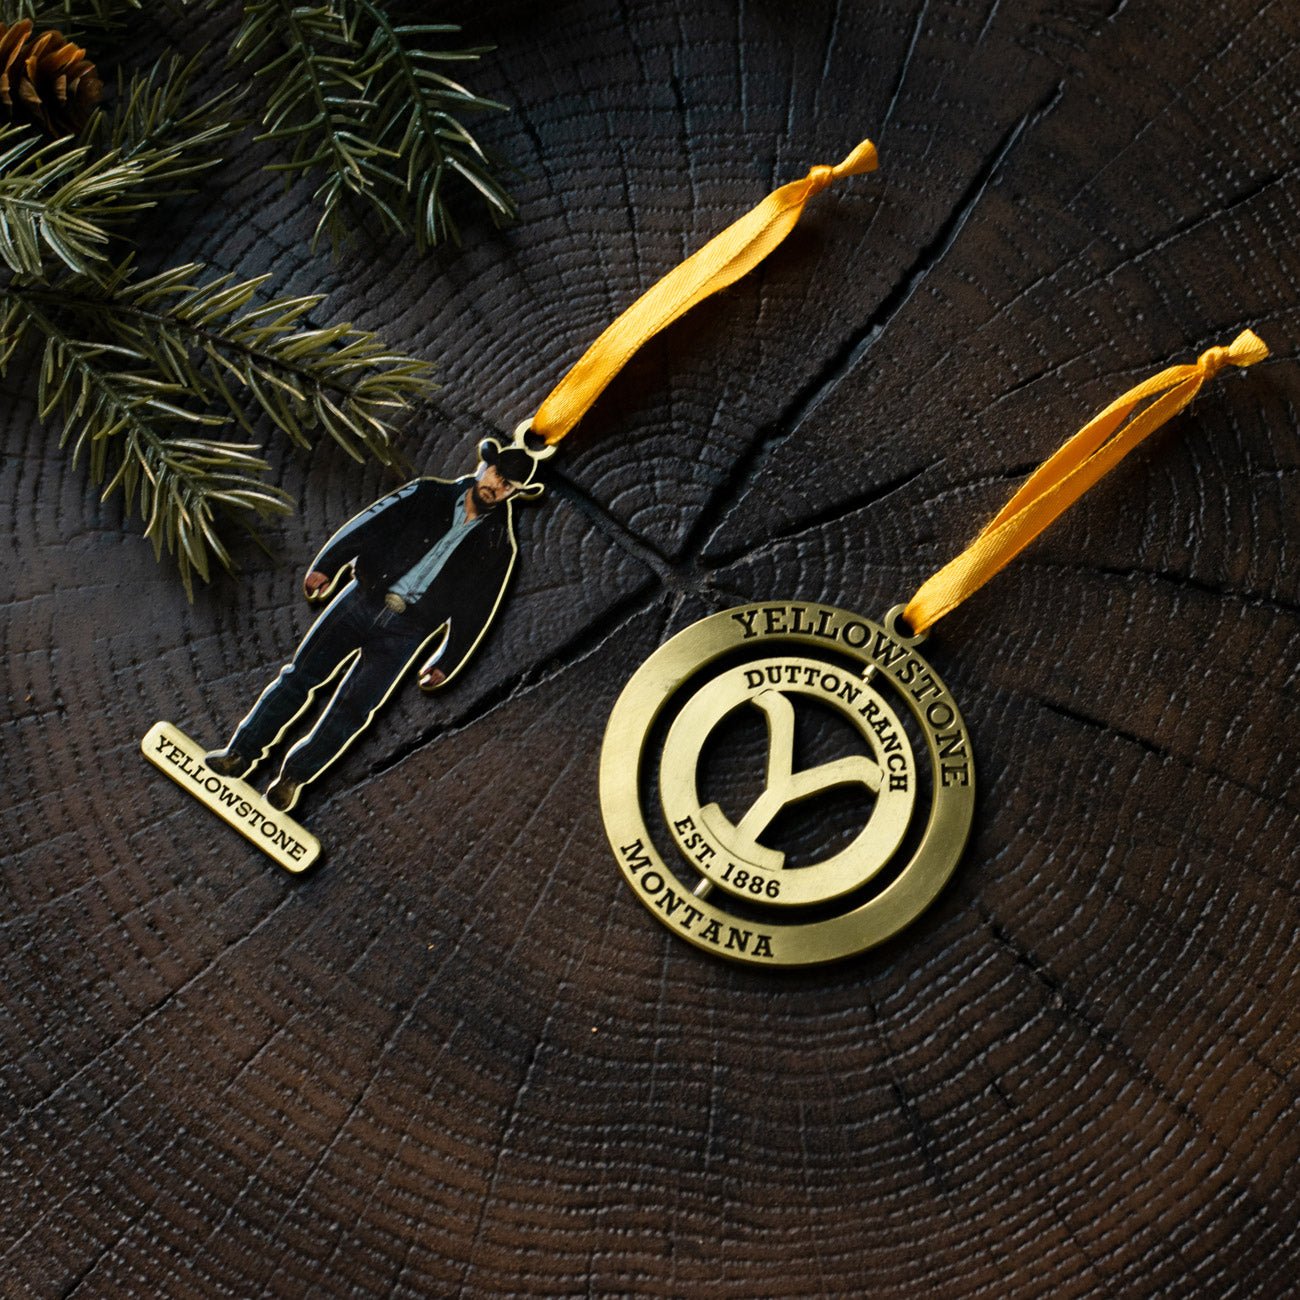 Yellowstone Dutton Ranch Gold 3D Spinner Ornament - Paramount Shop